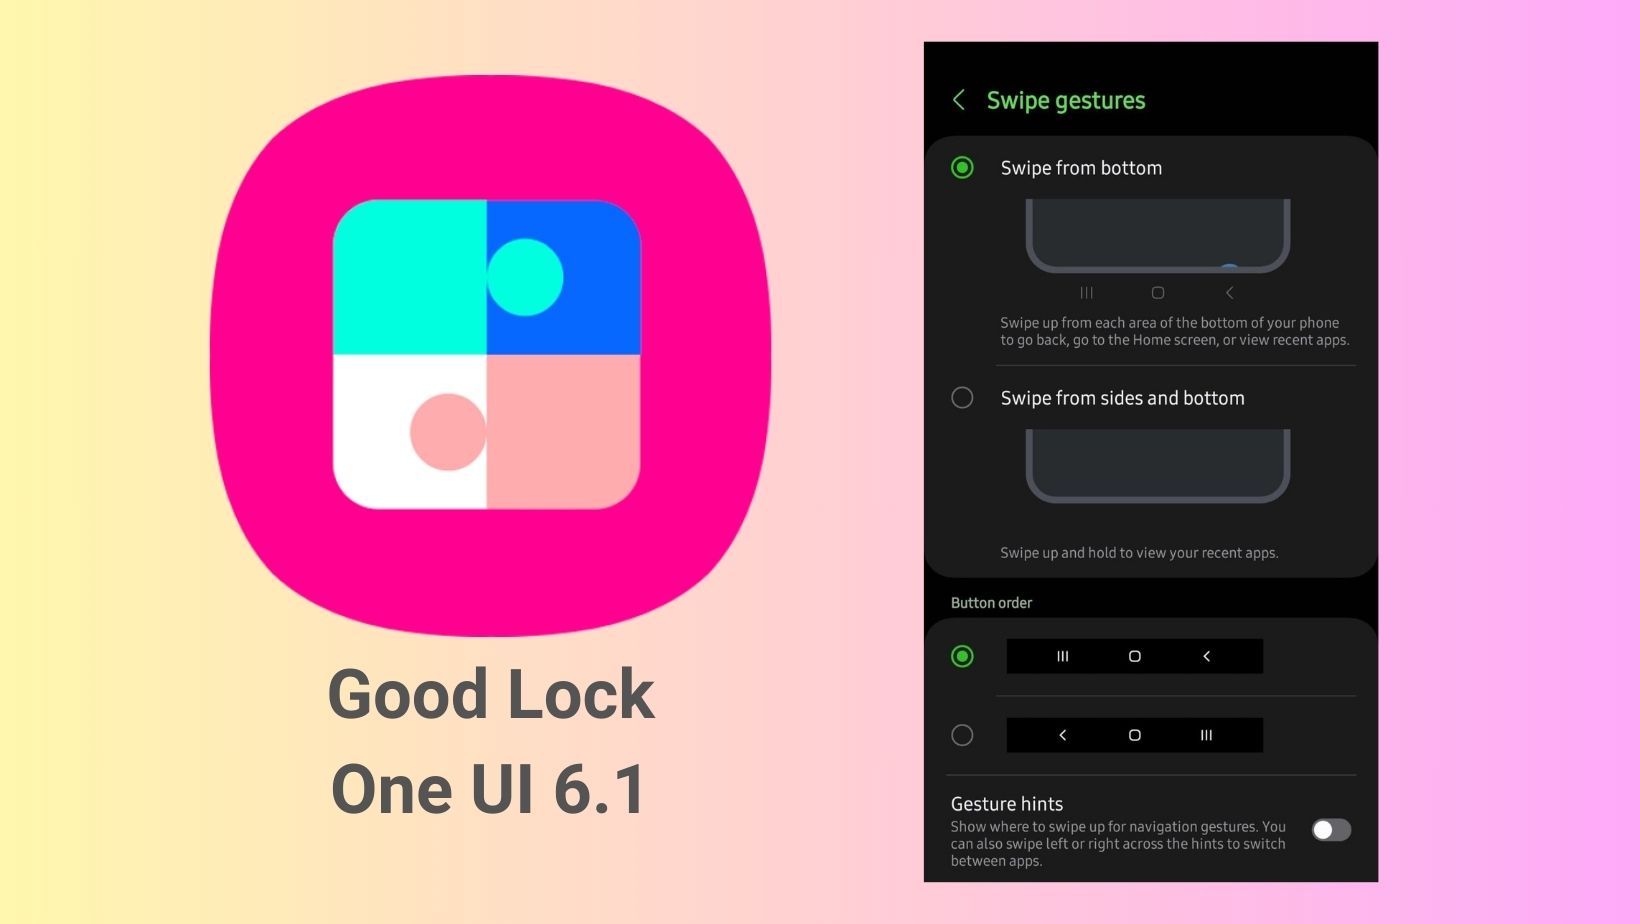 How to bring back old Navigation Gestures on One UI 6.1 using Good Lock — Swipe from bottom